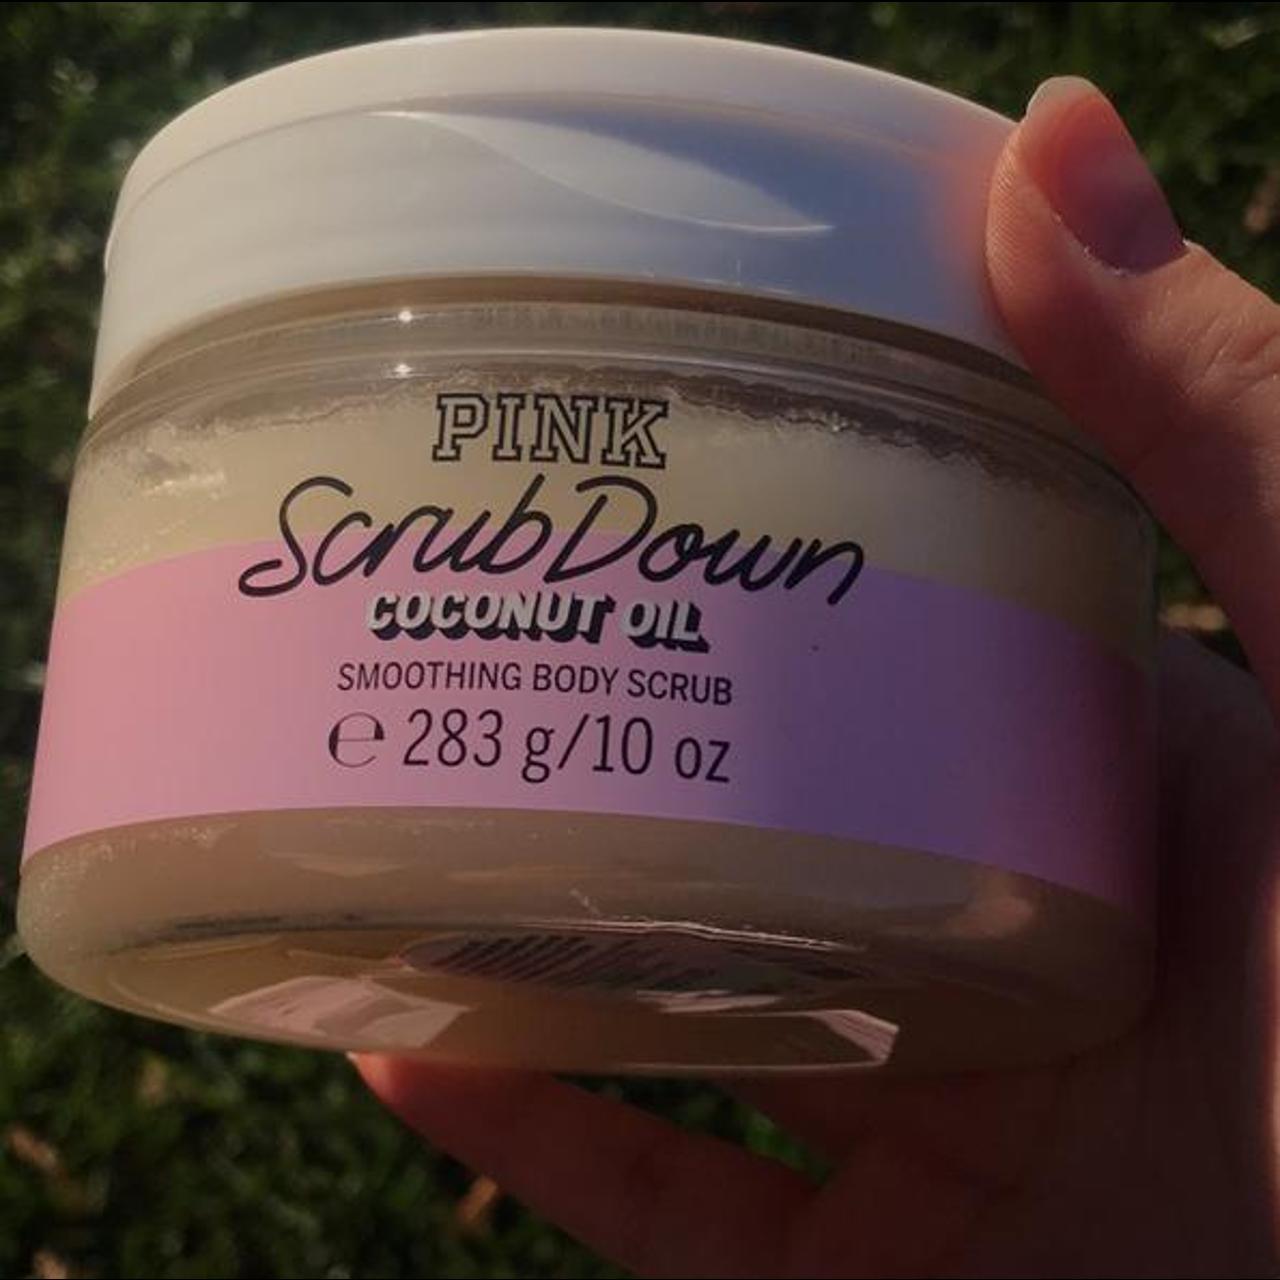 Product Image 3 - NEW PINK scrub down coconut